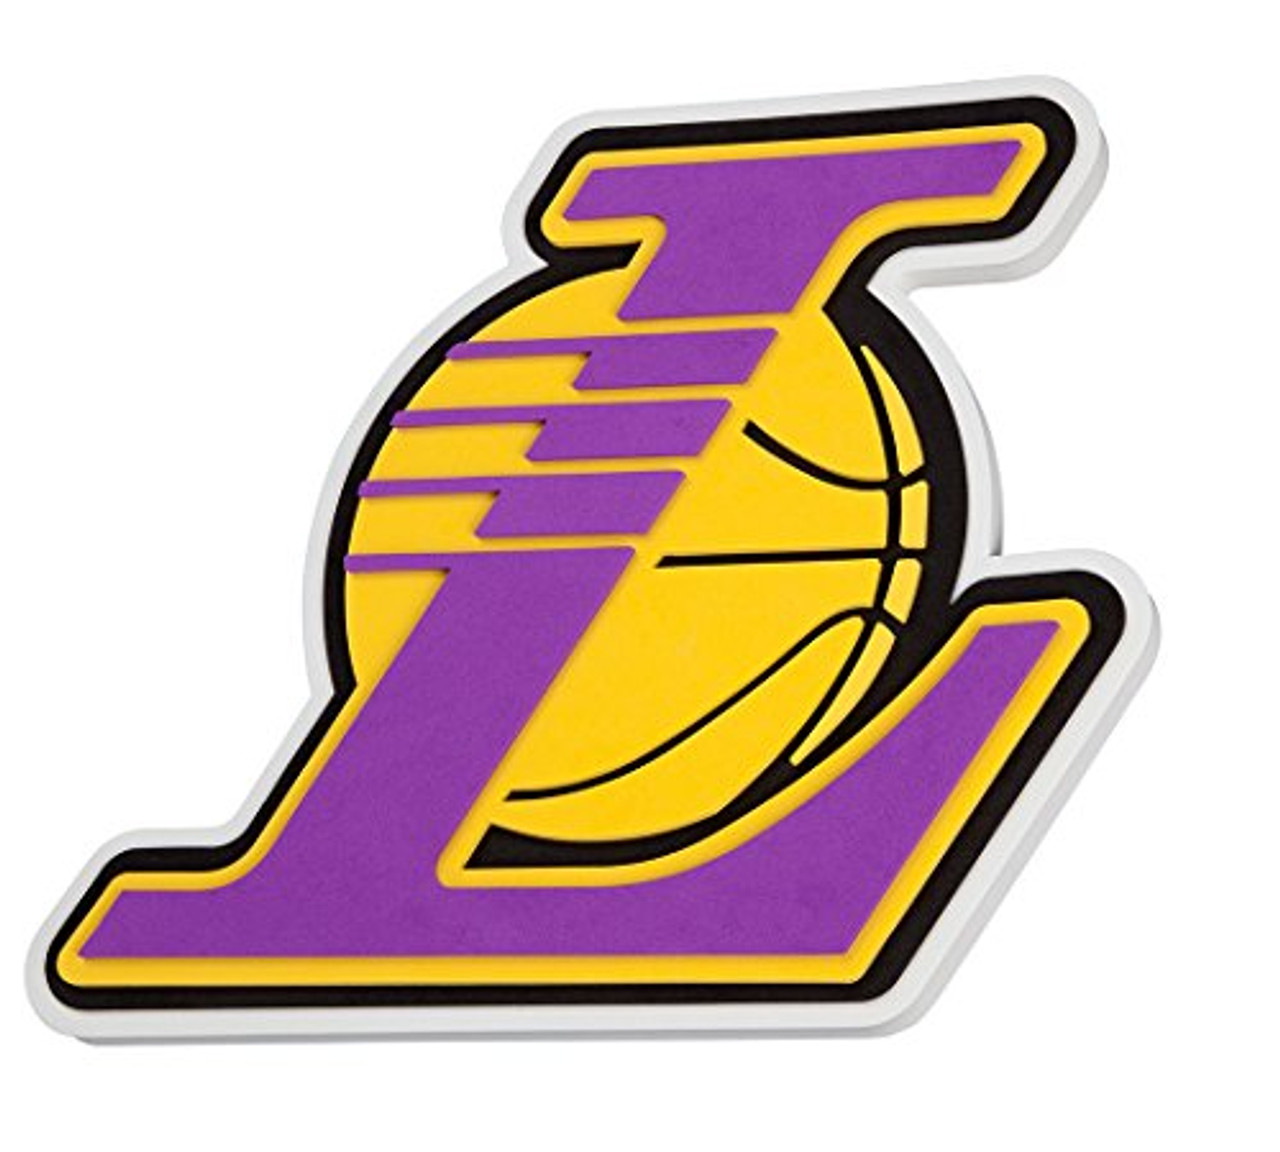 Fanfave Los Angeles Lakers NBA Fan Chain Necklace